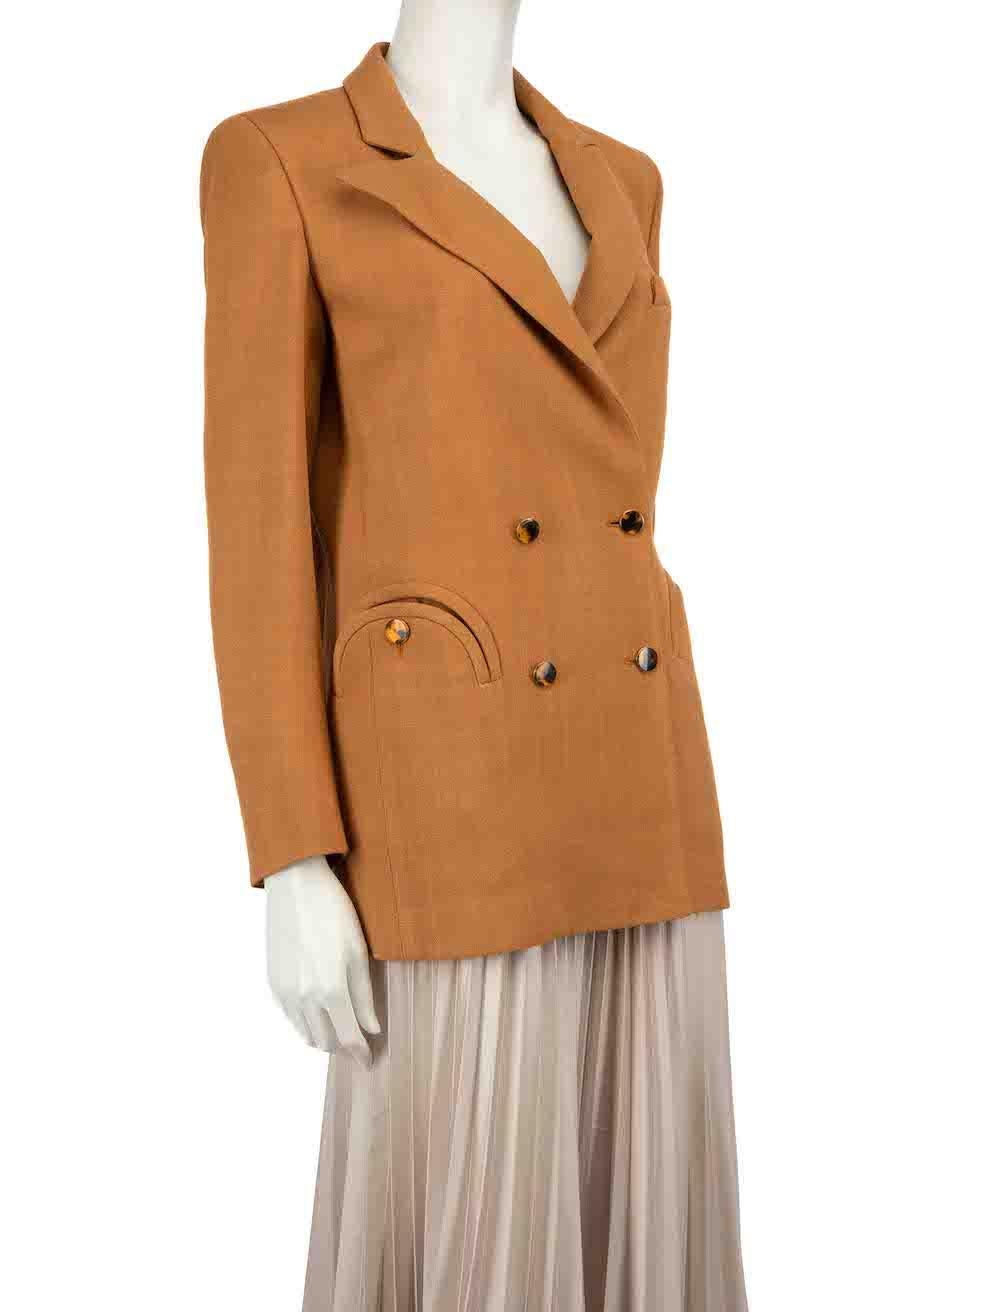 CONDITION is Very good. Minimal wear to blazer is evident. Minimal wear to the centre-front with a small mark on this used Blazè Milano designer resale item.
 
 
 
 Details
 
 
 Camel
 
 Viscose
 
 Everyday blazer
 
 Button up fastening
 
 Shoulder